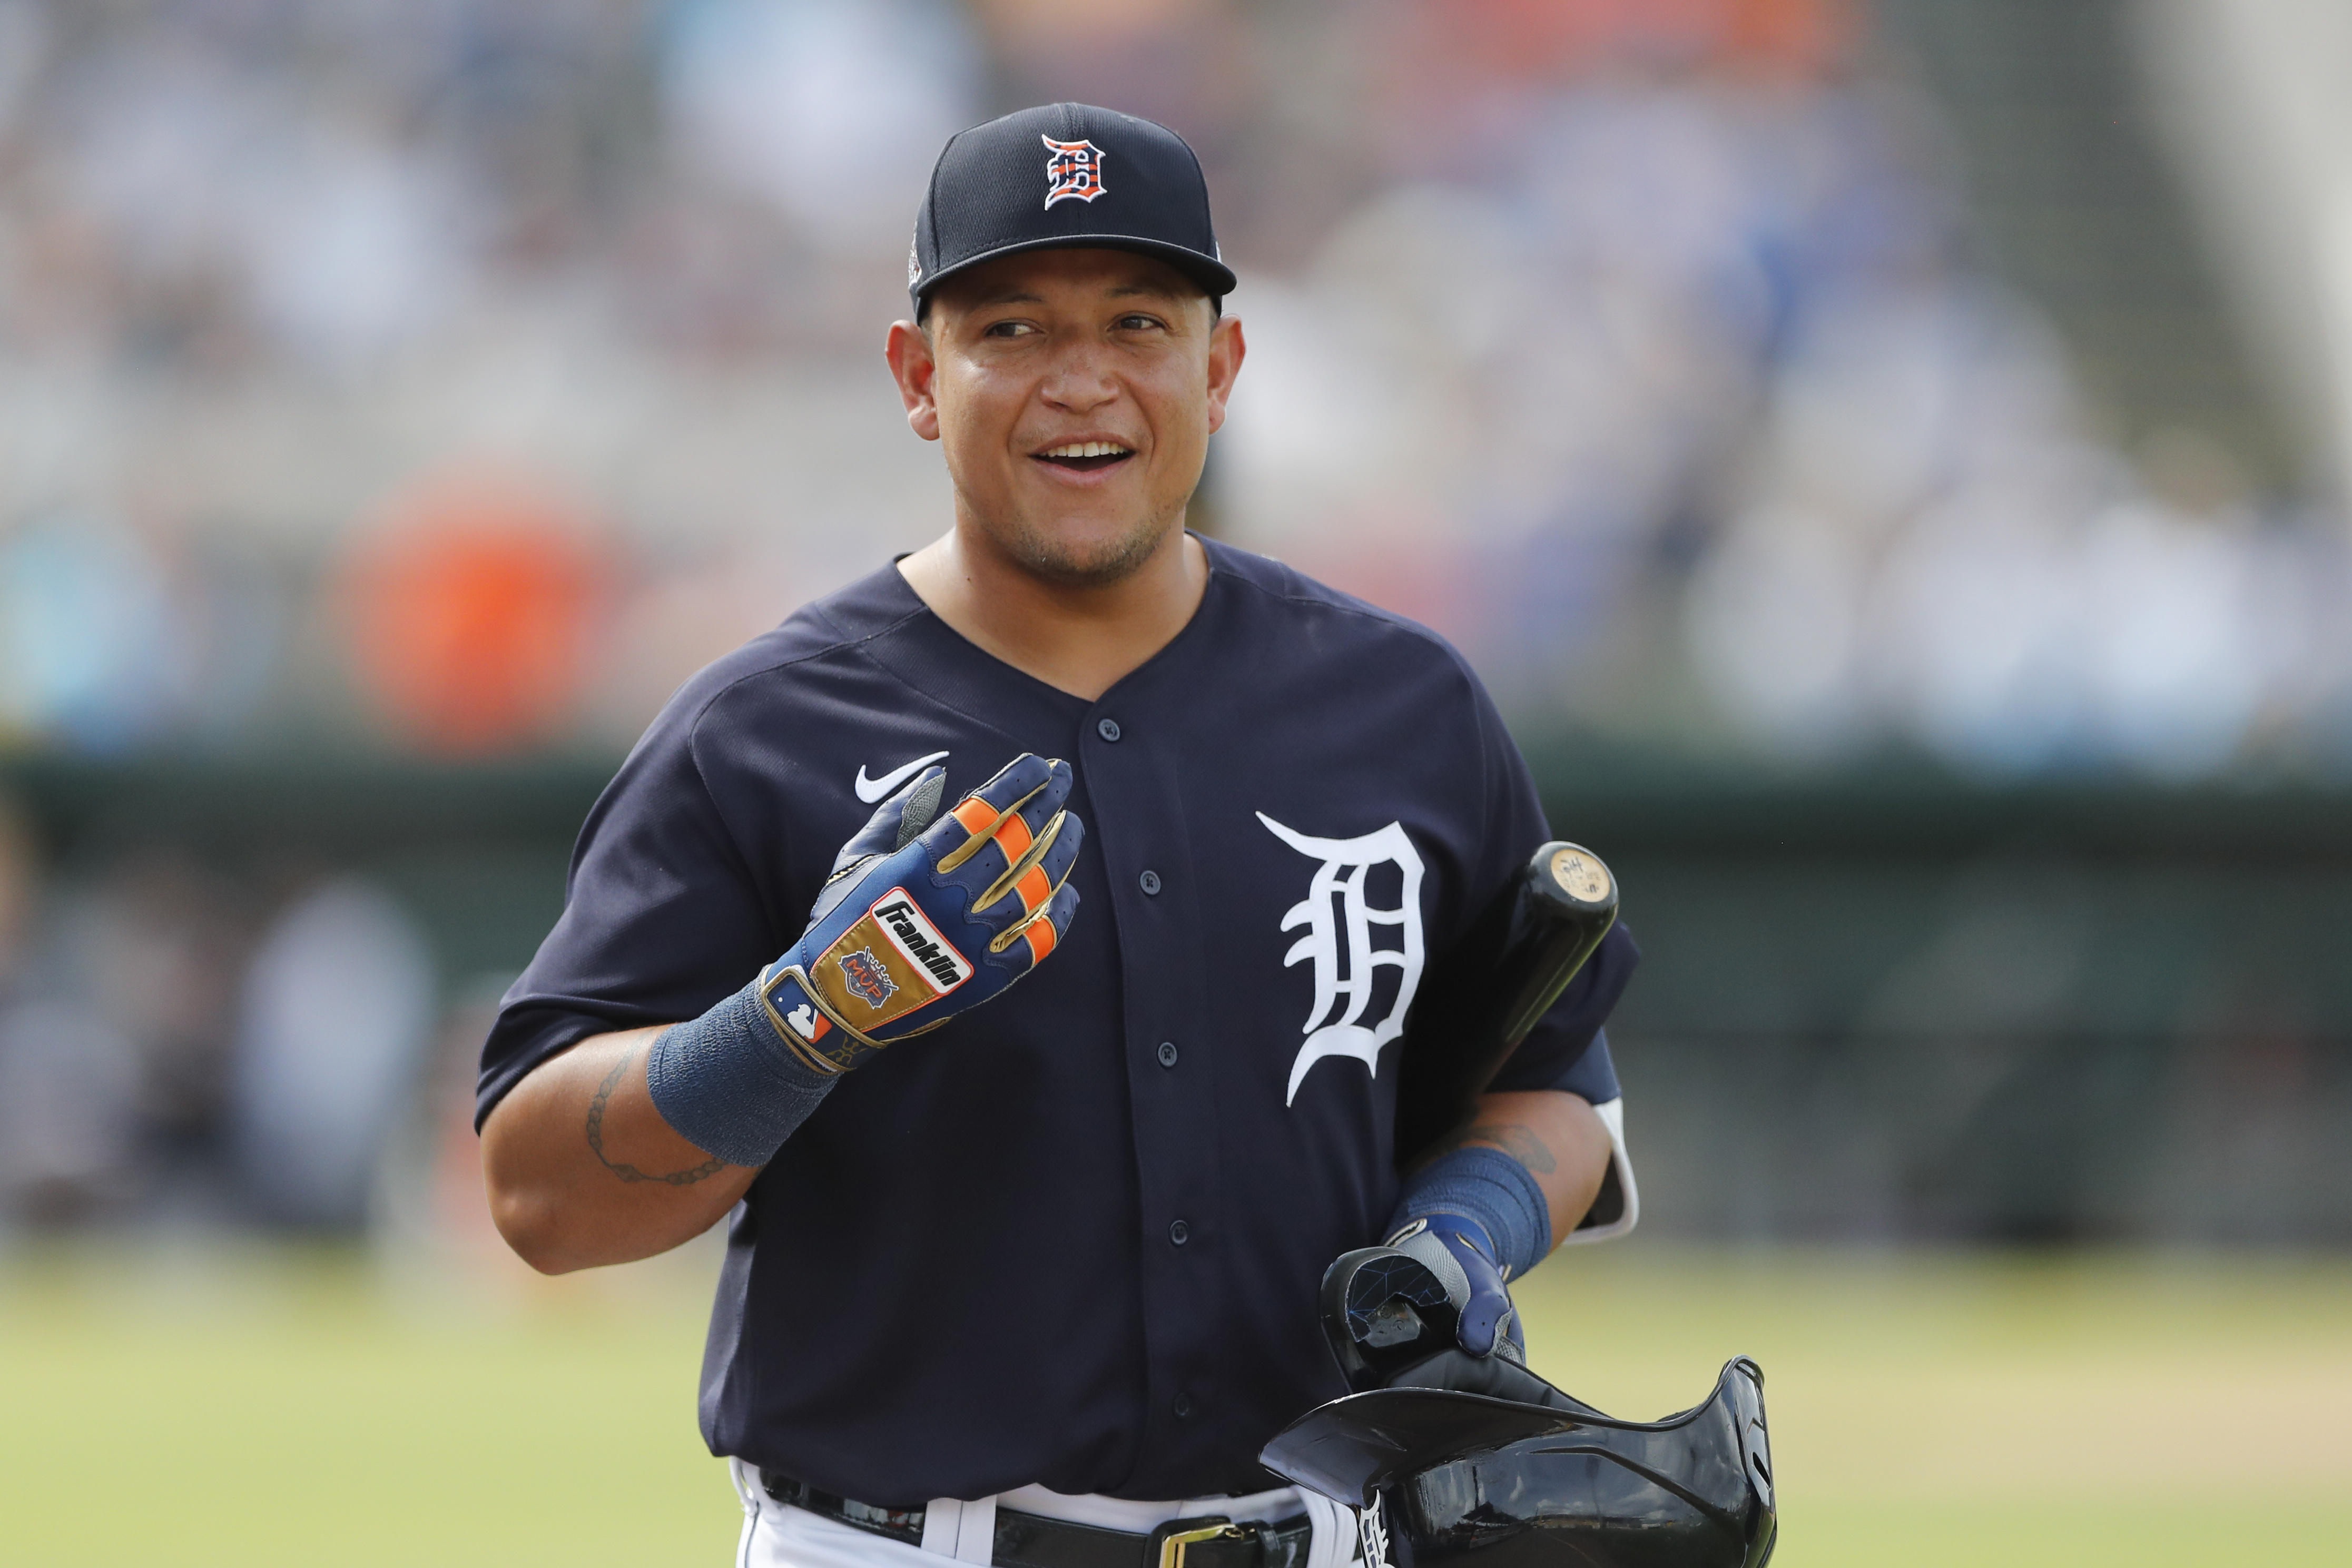 Fans young and old follow Cabrera's last steps as legendary Tigers player